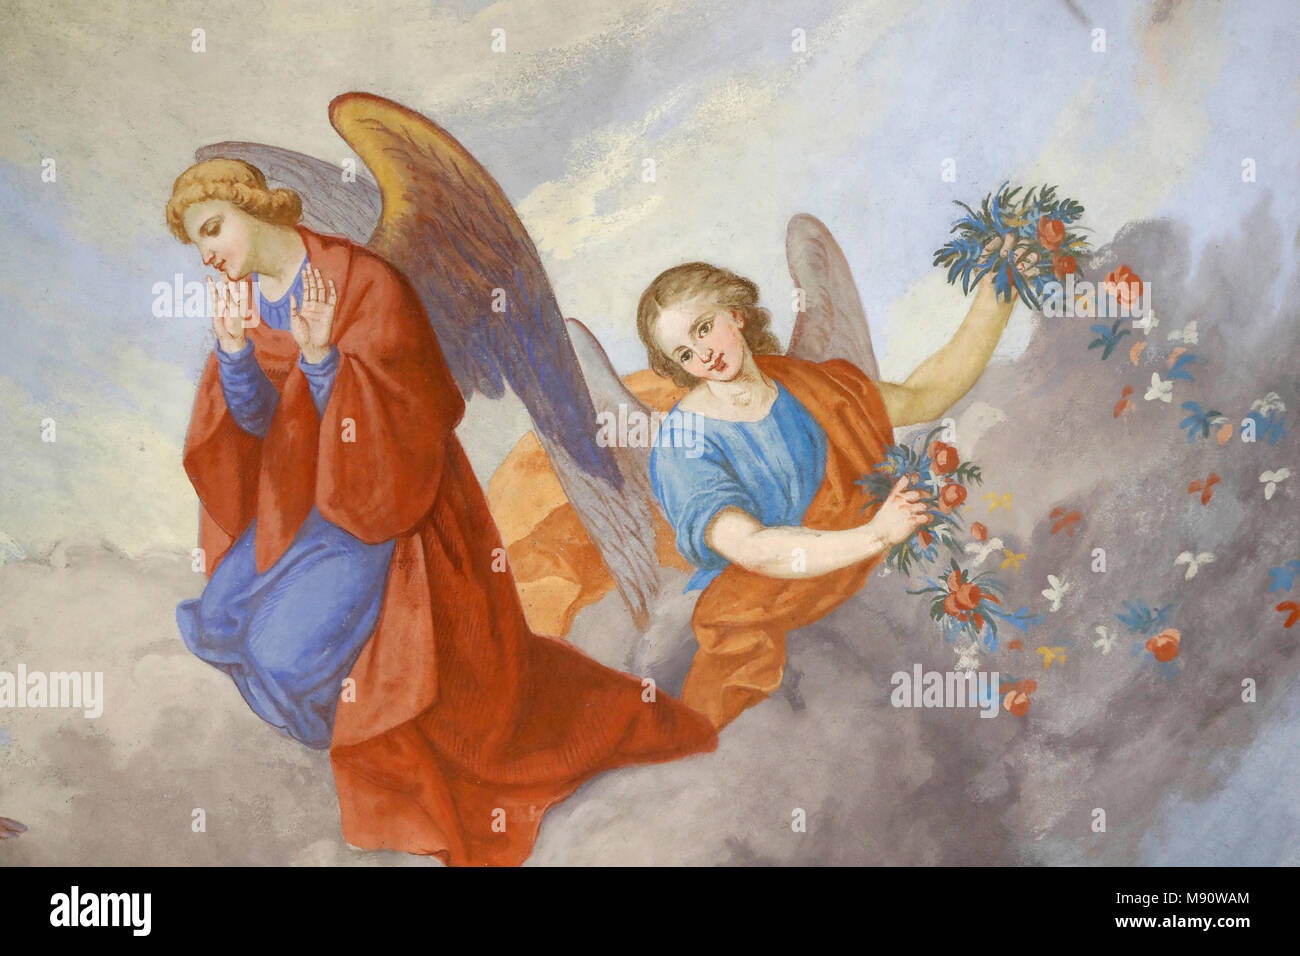 Saint-Grat church. Ceiling painting. Angels.  Valgrisenche. Italy. Stock Photo